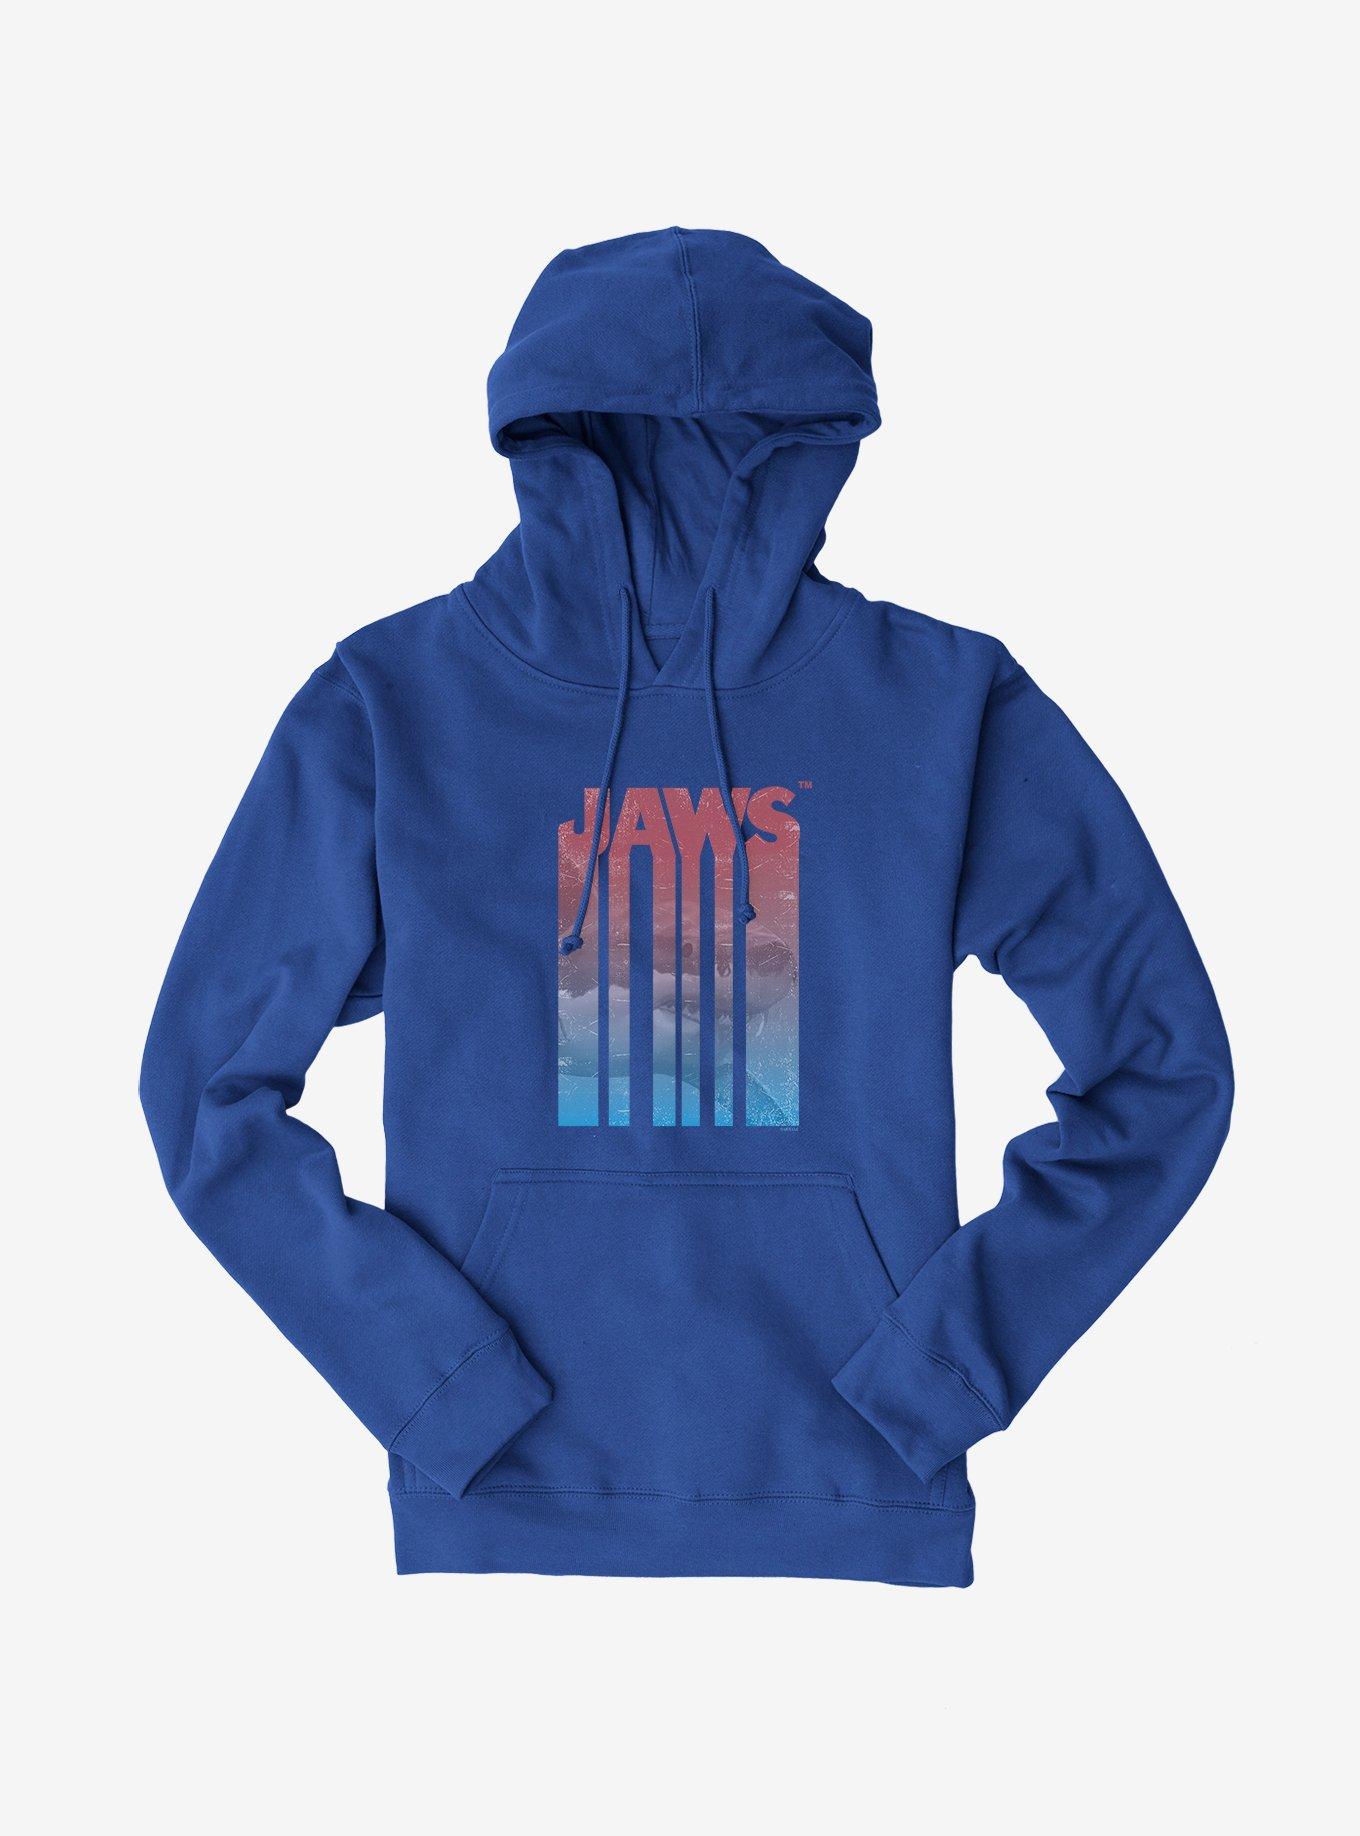 Universal Jaws Font Shark Picture Hoodie, , hi-res